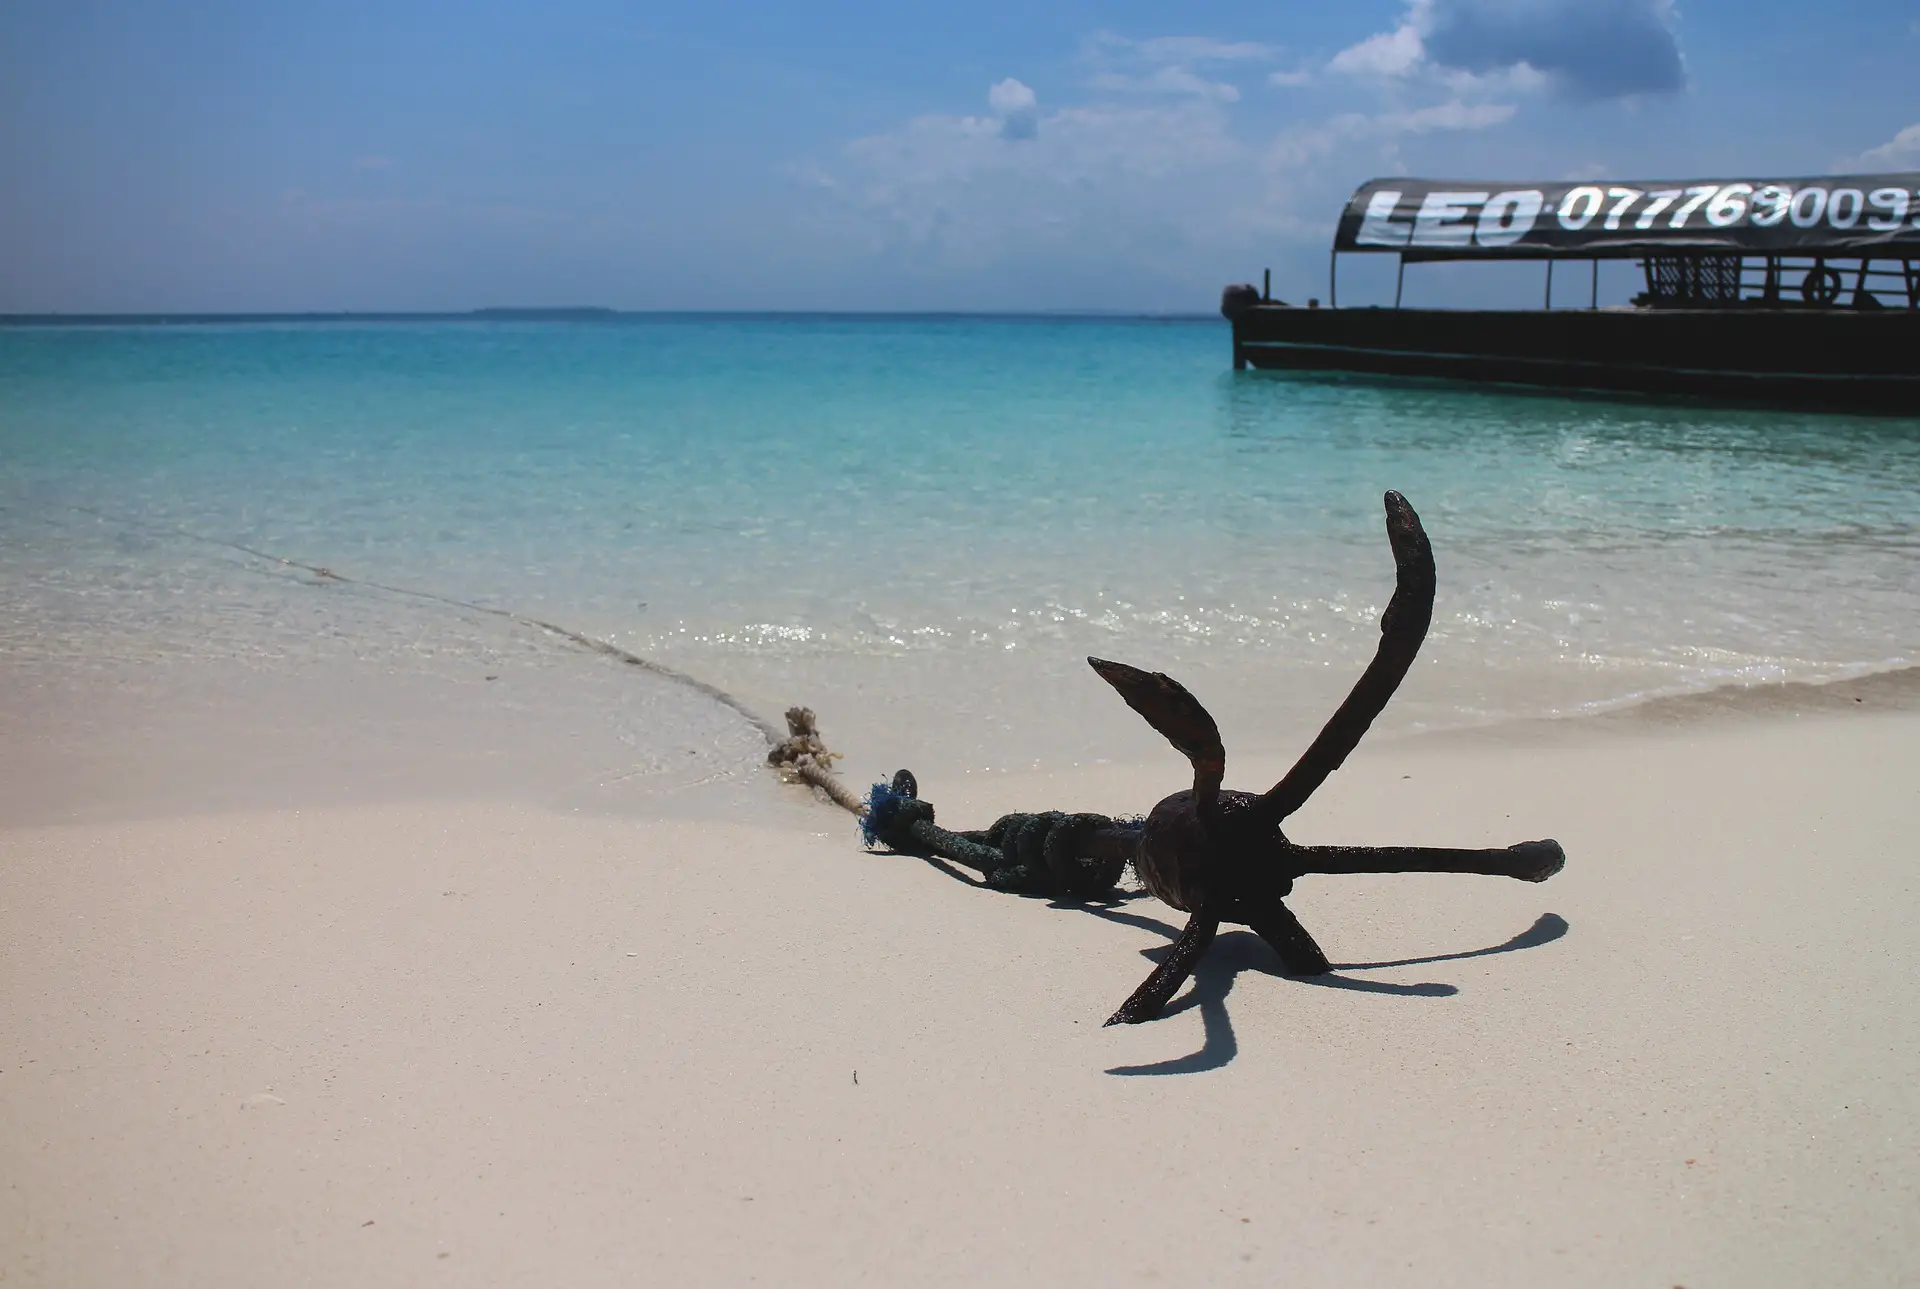 An anchor is deployed from a boat to a sandbar